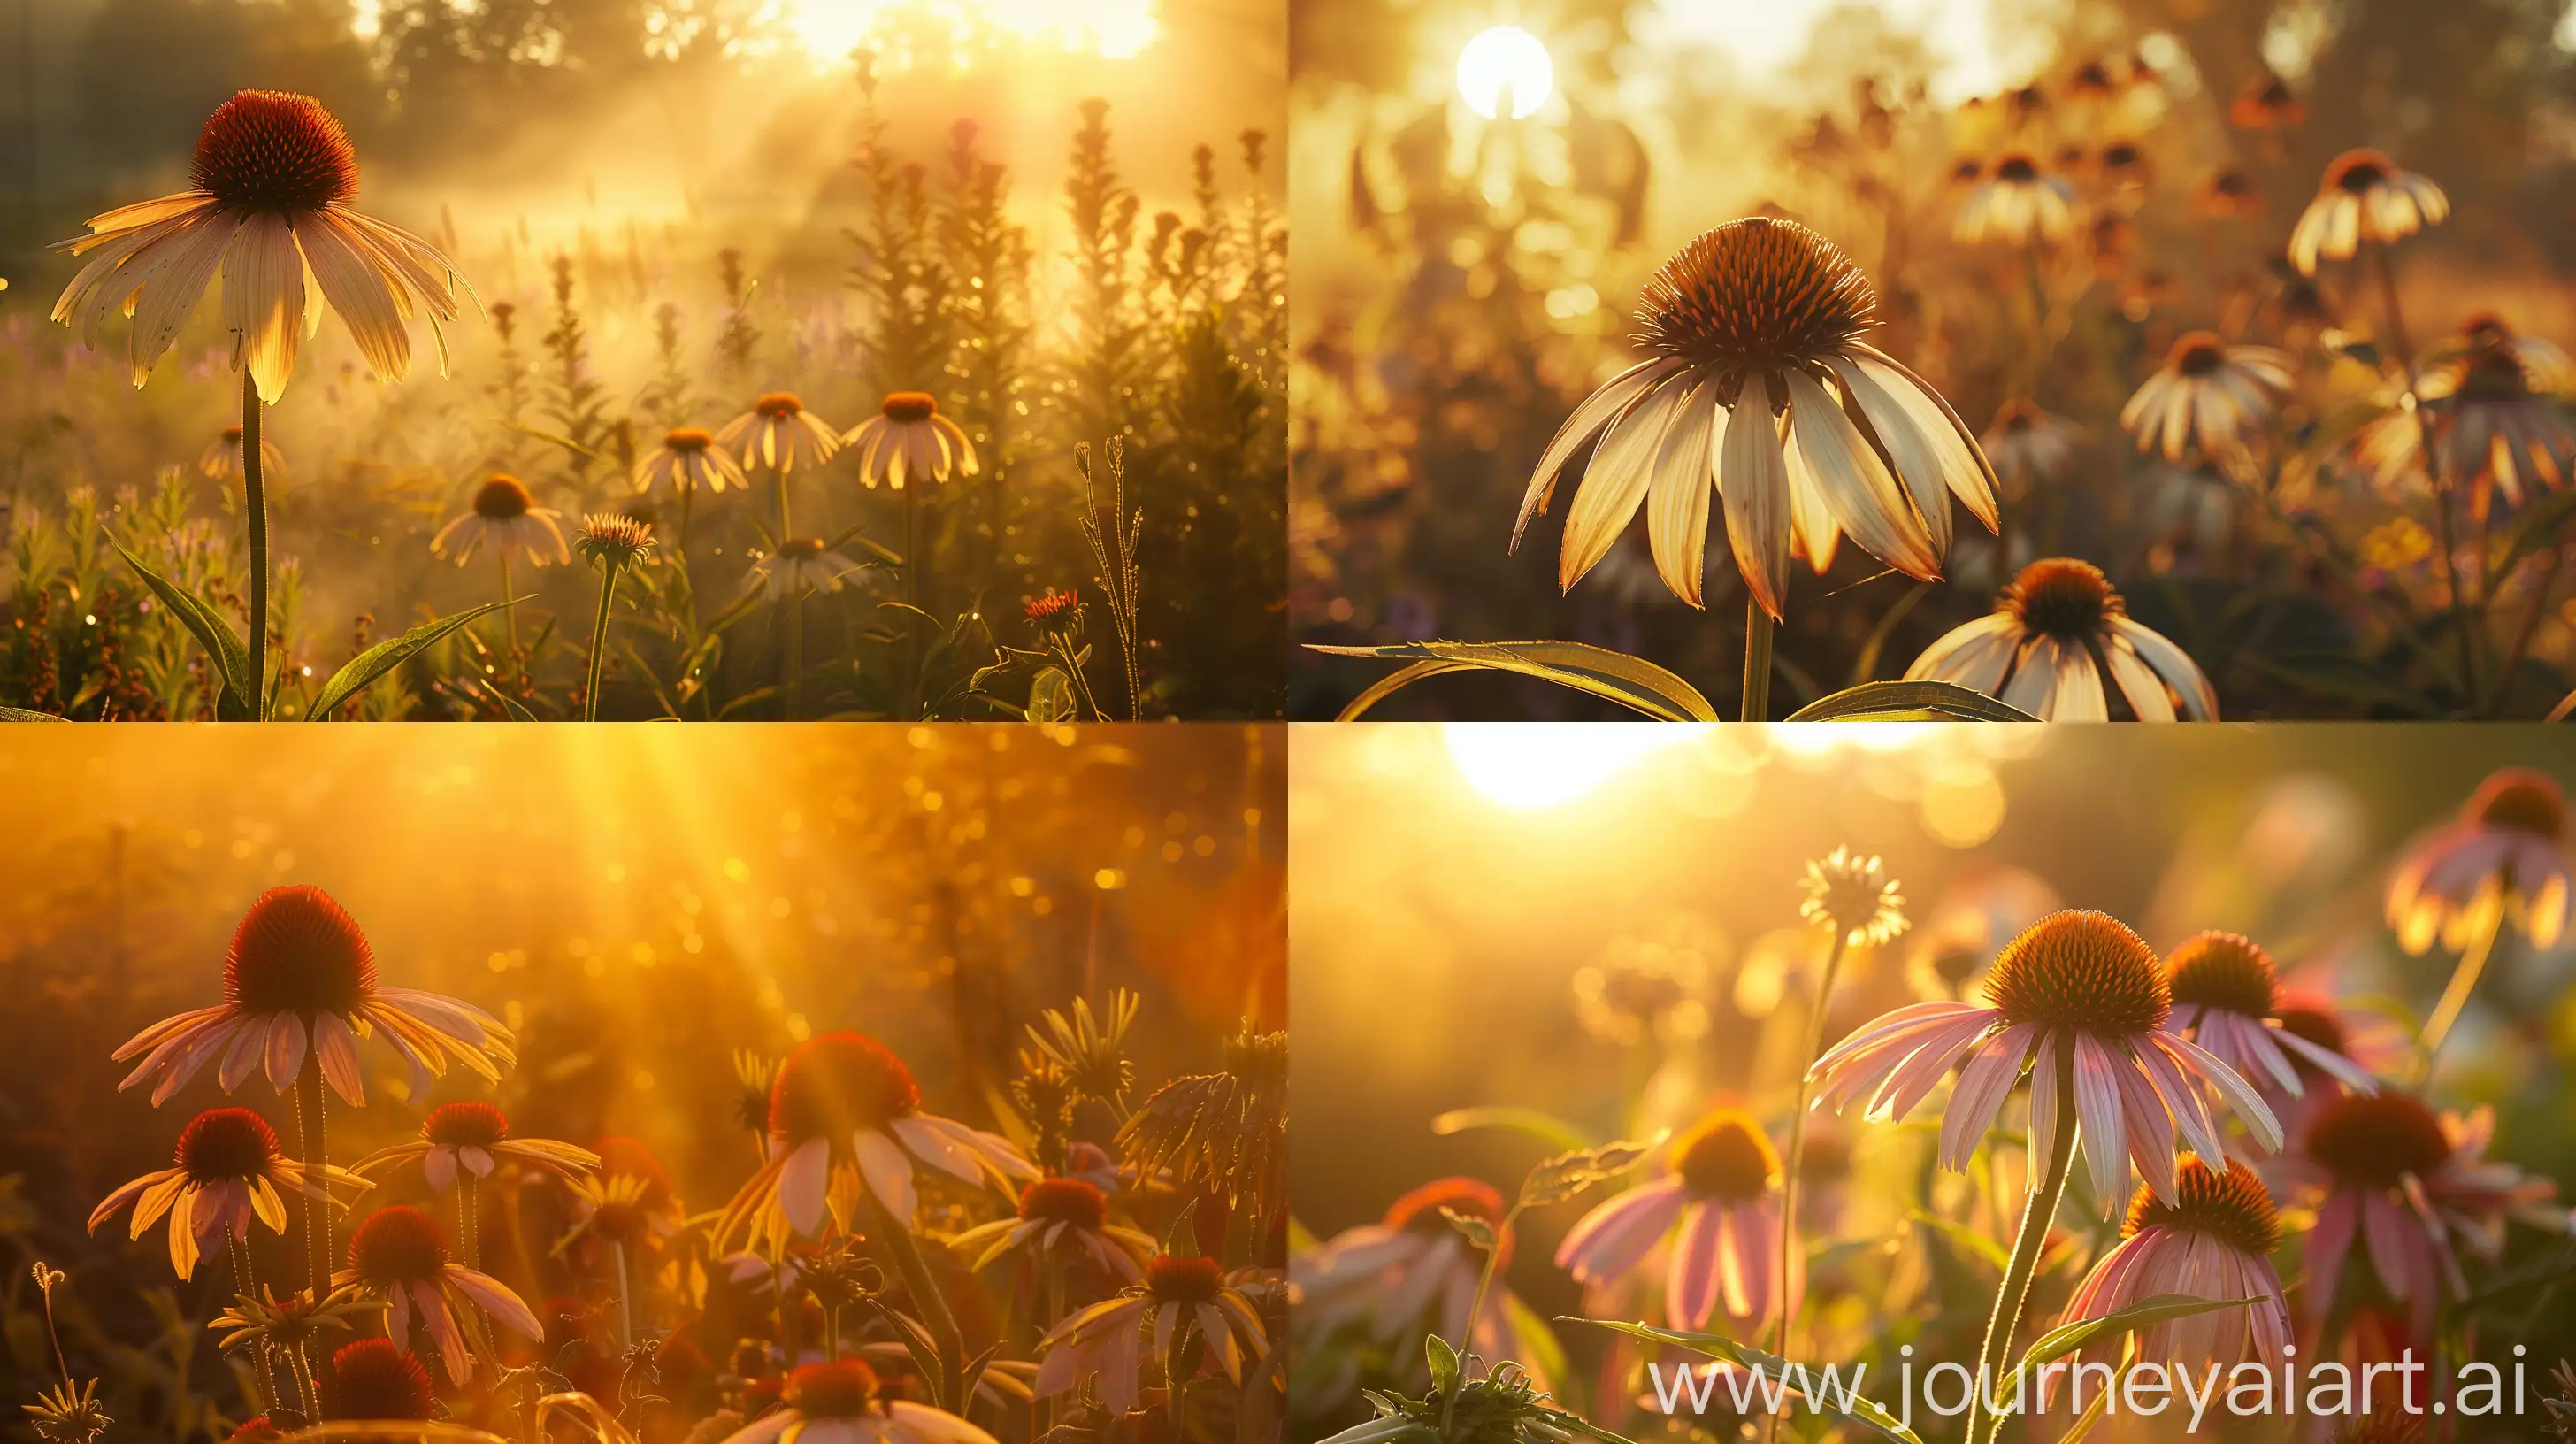 High detailed photo capturing a Echinacea, Magnus. The sun, casting a warm, golden glow, bathes the scene in a serene ambiance, illuminating the intricate details of each element. The composition centers on a Echinacea, Magnus. An award-winning classic! With enormous flowers up to 6" across, Magnus is a favorite for the back of the perennial border and beautiful in fresh arrangements. An exceptionally hardy perennial that is heat and drought tolerant. Grow in full sun to light s. The image evokes a sense of tranquility and natural beauty, inviting viewers to immerse themselves in the splendor of the landscape. --ar 16:9 